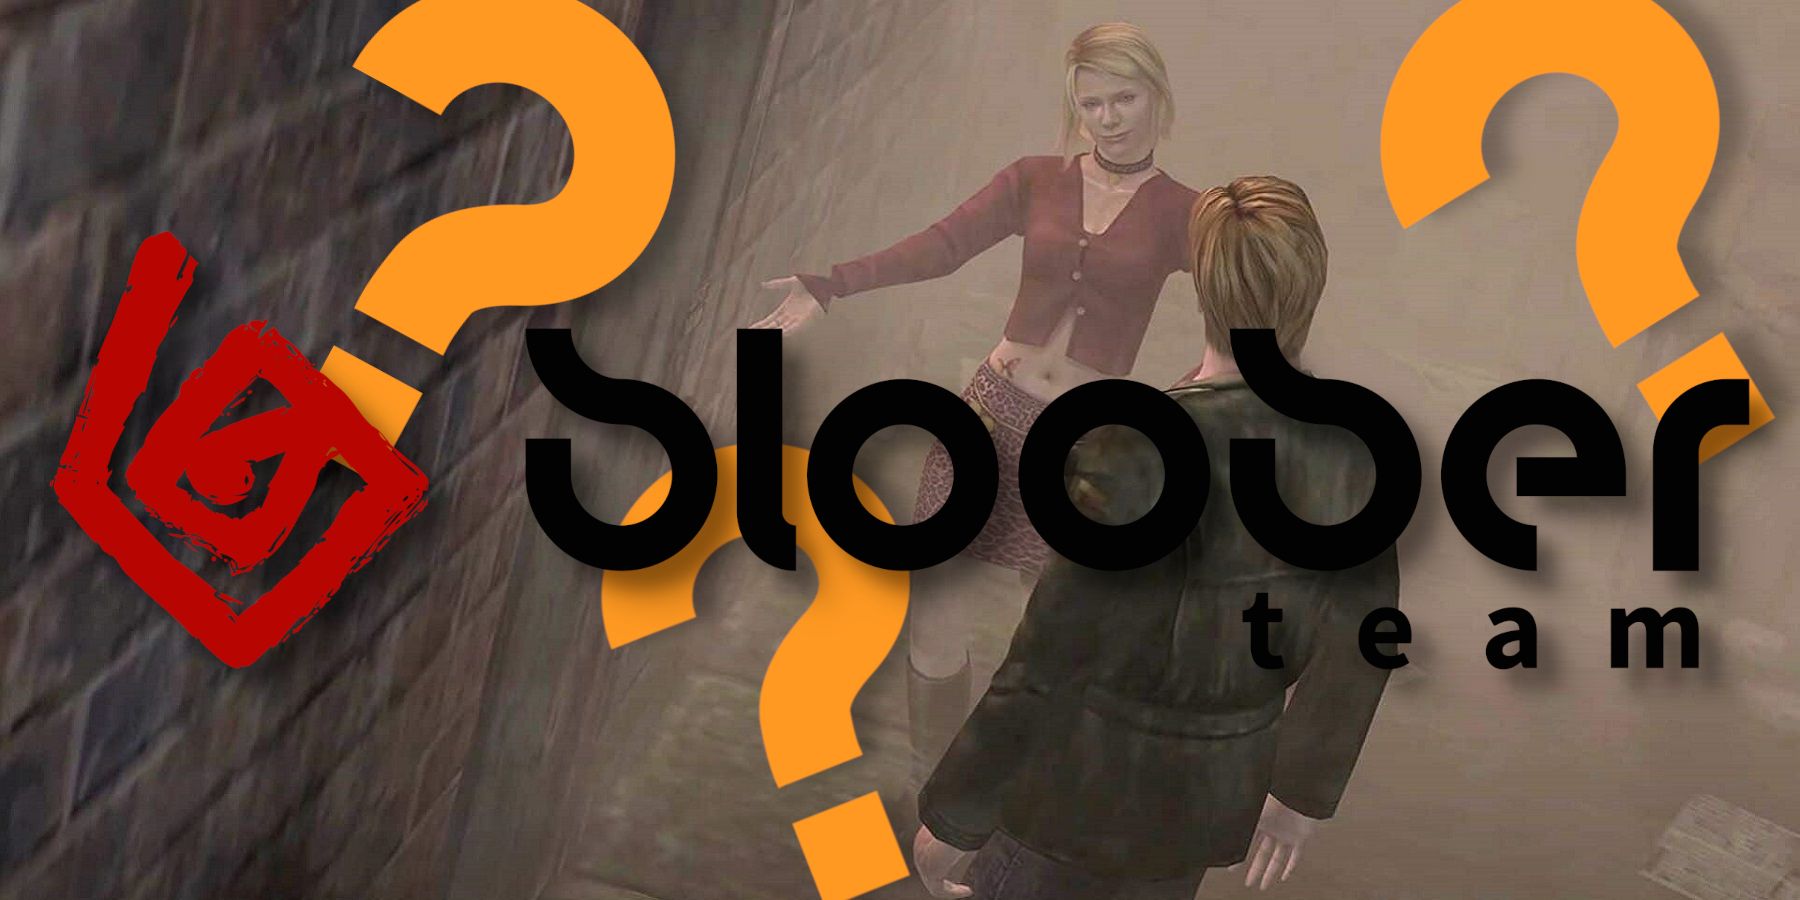 Image from Silent Hill 2 with the Bloober Team logo in front and some question marks dotted around.